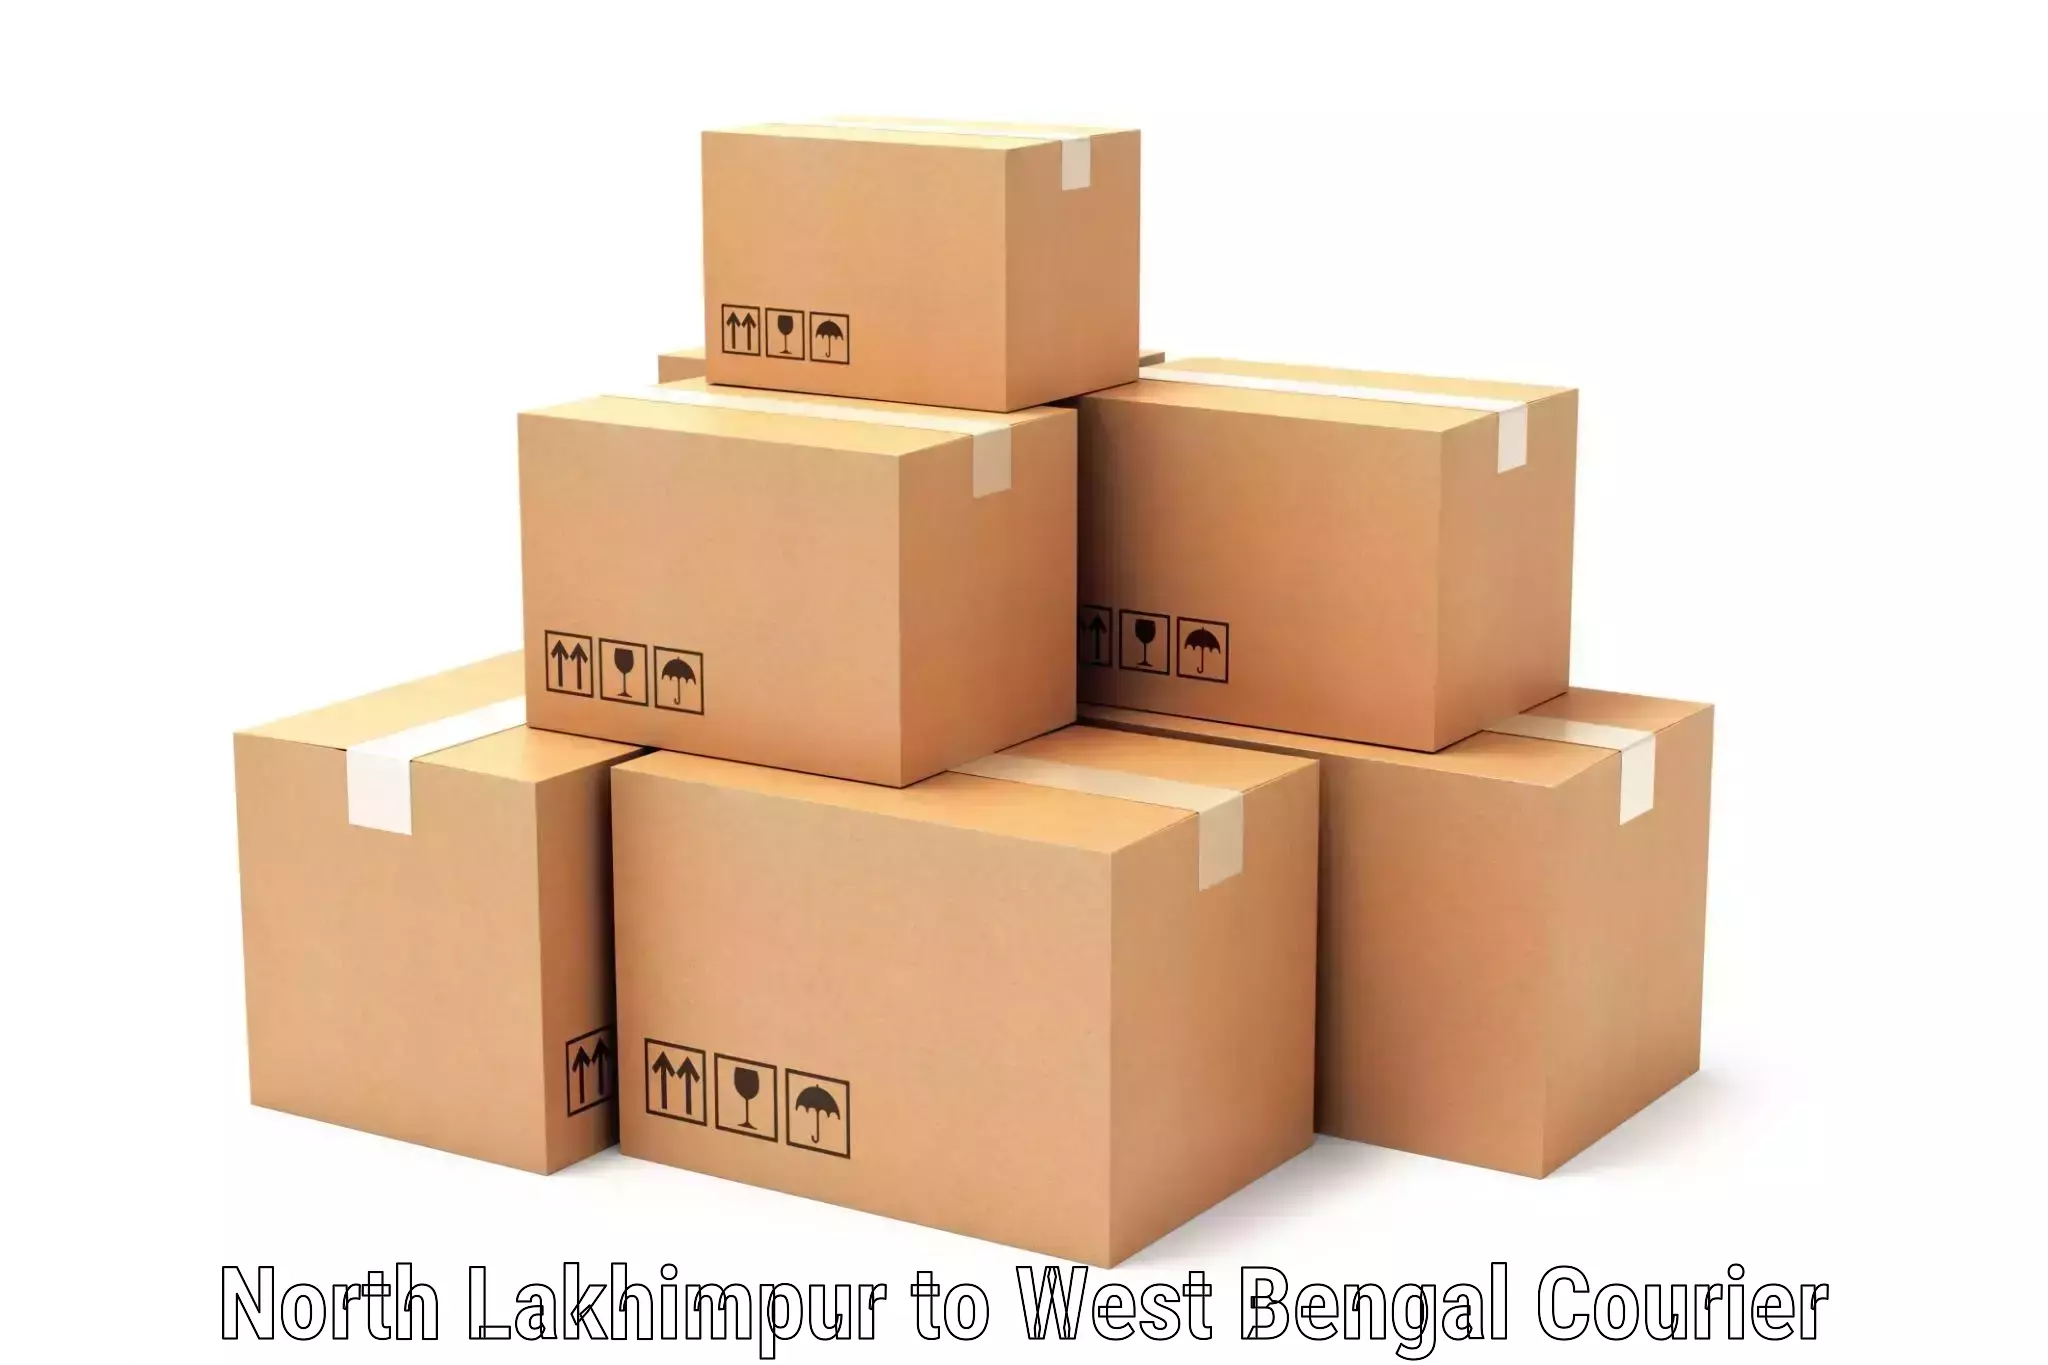 Nationwide shipping coverage in North Lakhimpur to South 24 Parganas